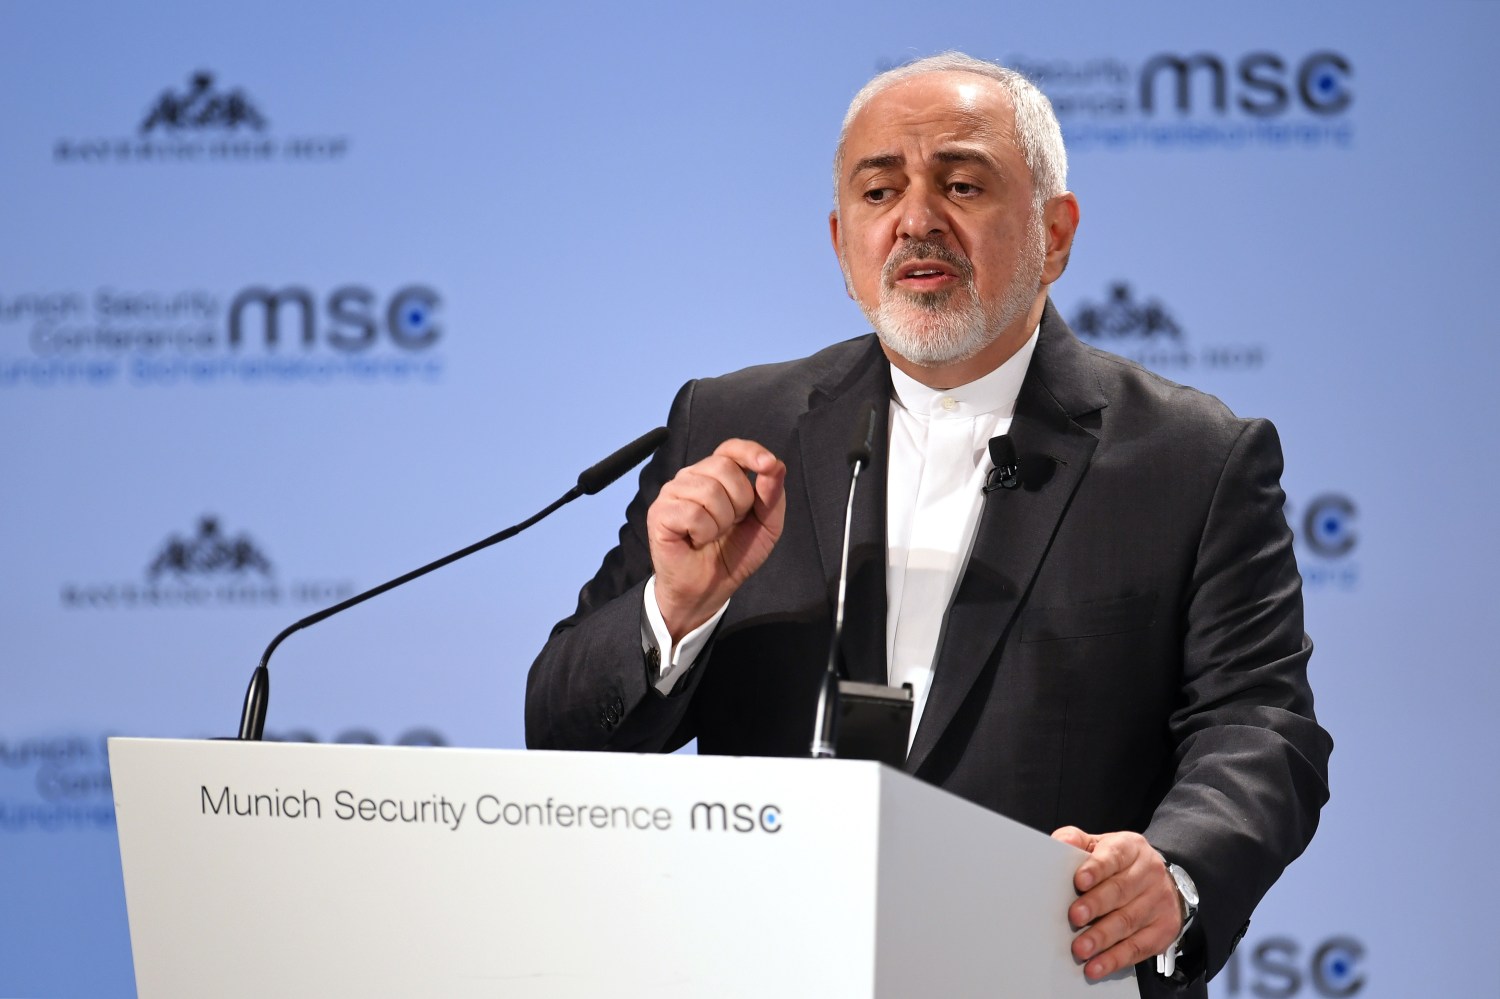 Iran's Foreign Minister Mohammad Javad Zarif speaks during the annual Munich Security Conference in Munich, Germany February 17, 2019. REUTERS/Andreas Gebert - RC1F3CF15930